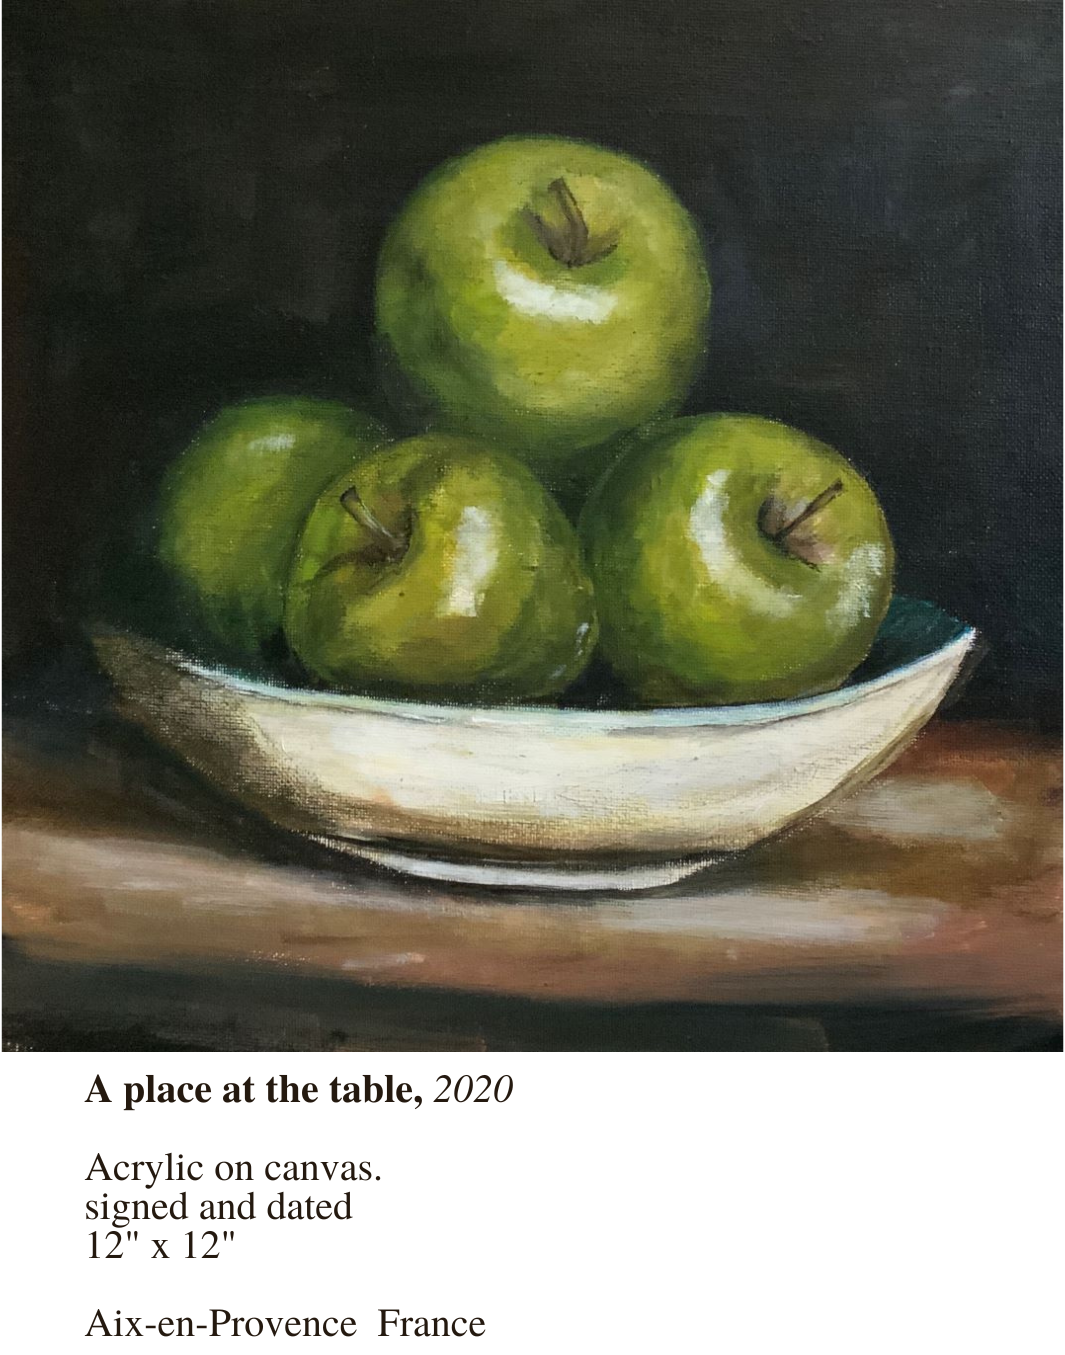 A place at the table